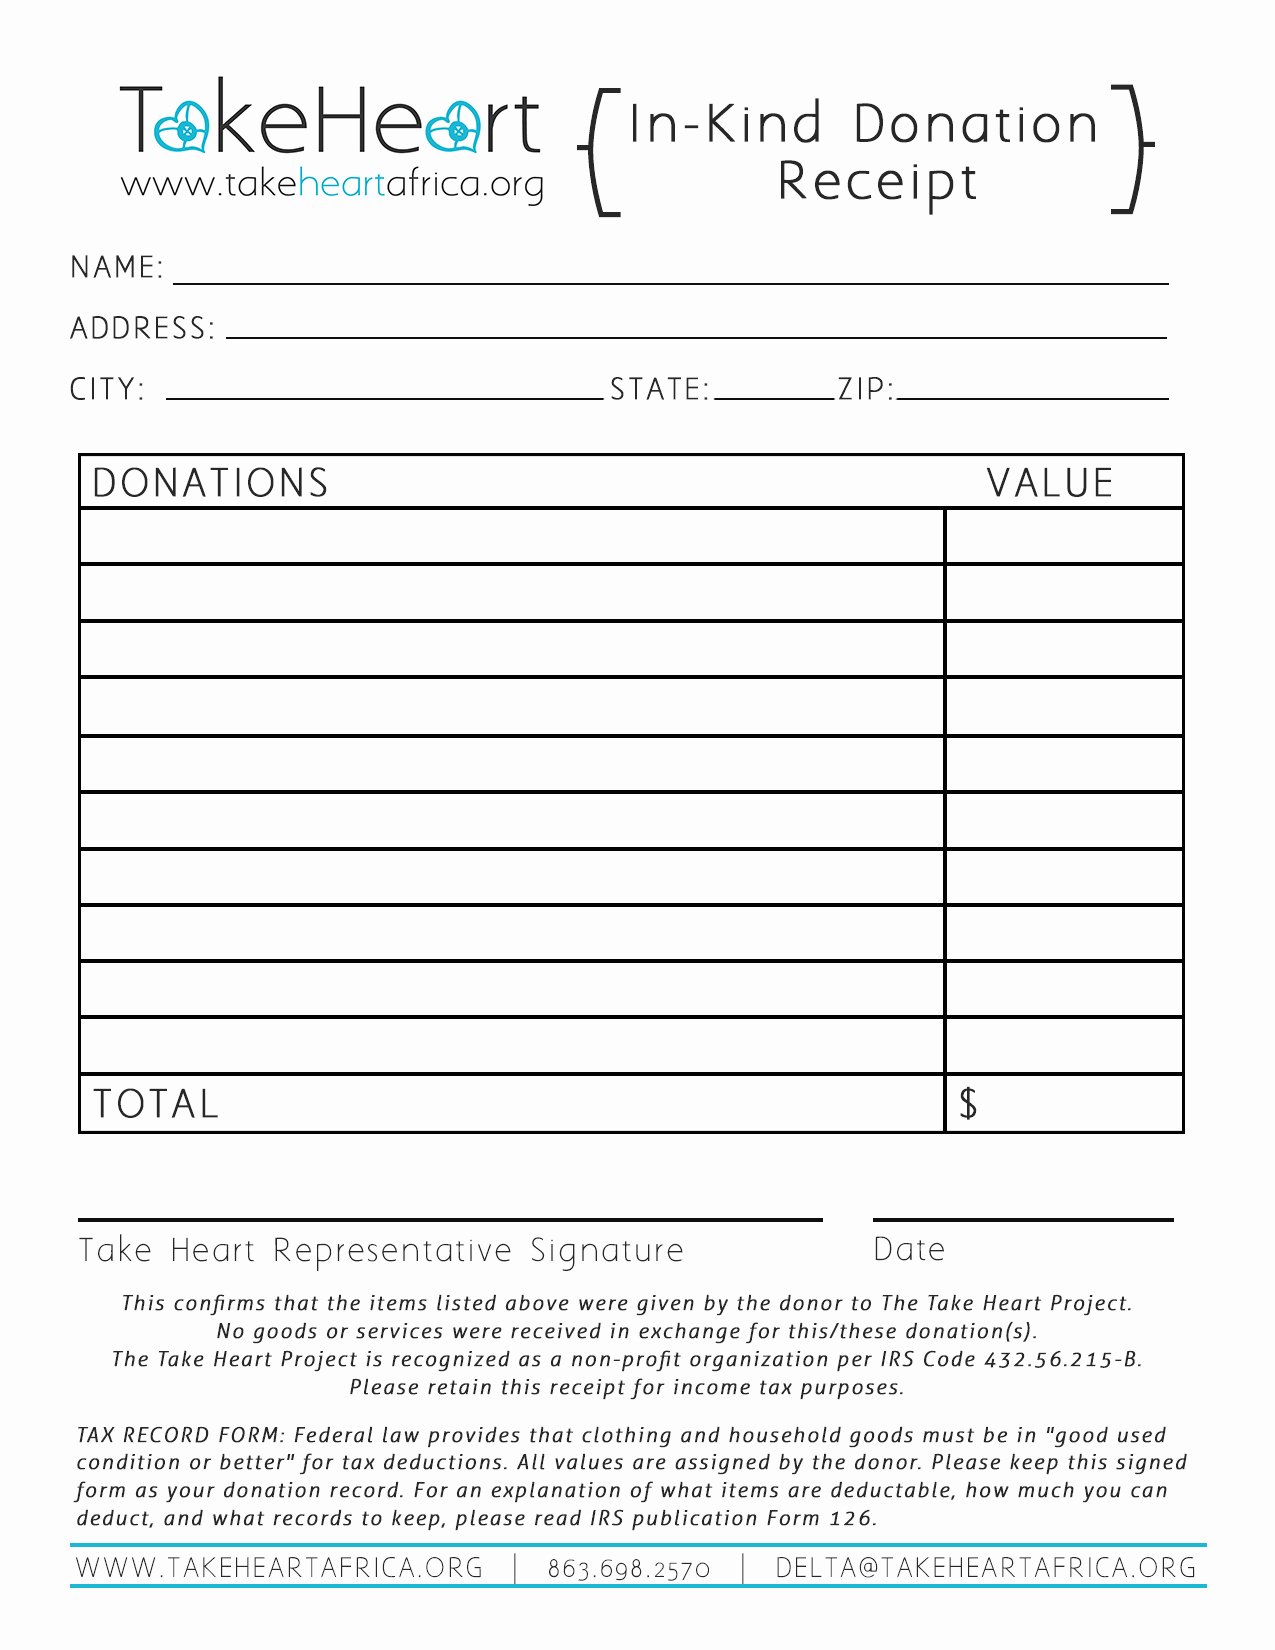 In Kind Donation Receipt Template Best Of In Kind Donations Take Heart Africa